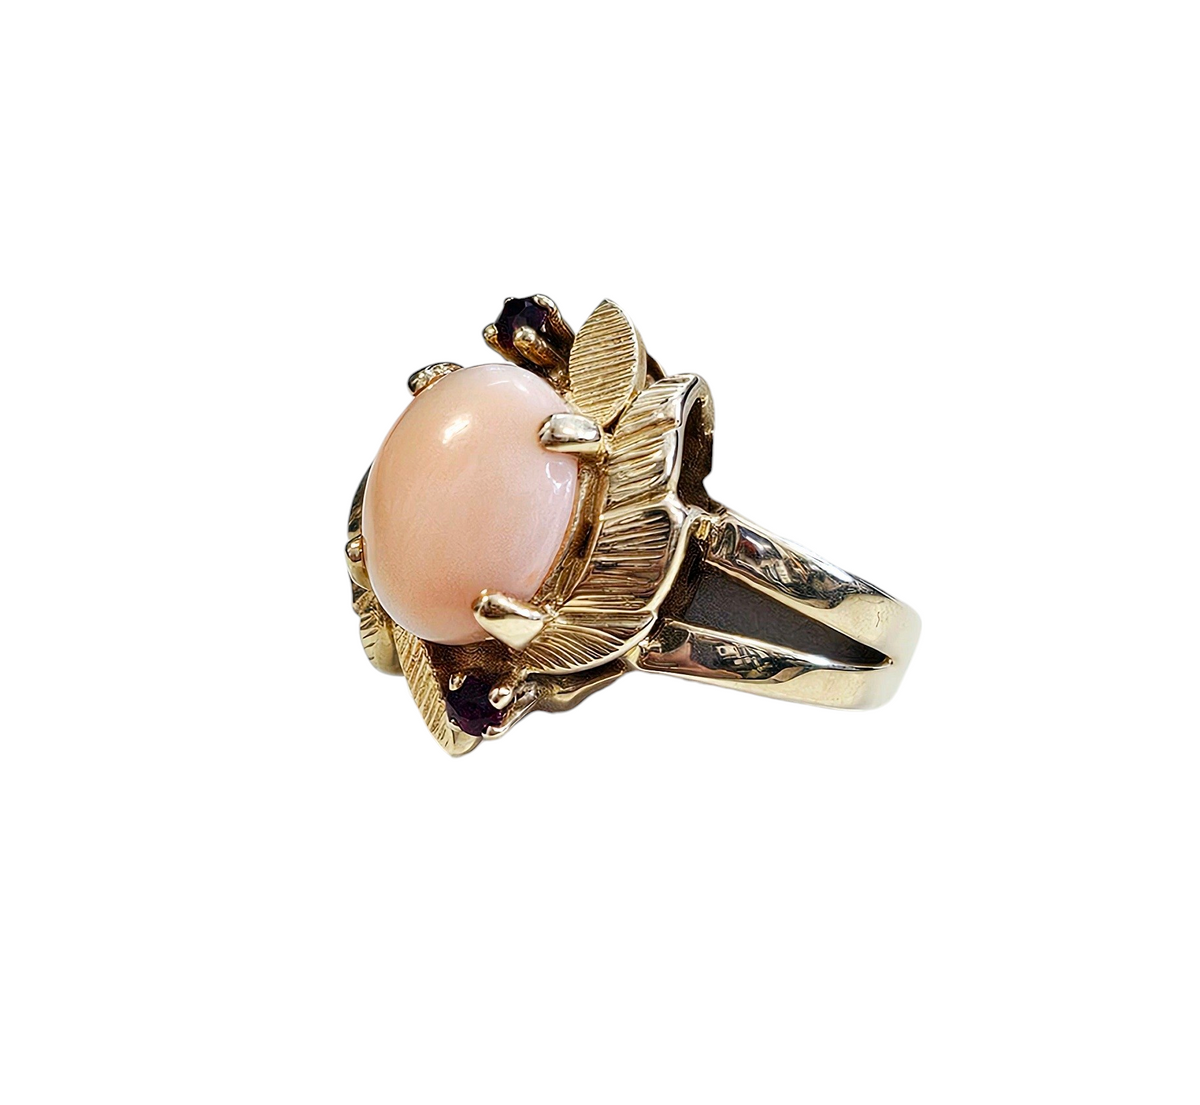 Floral Design Cabochon Oval Pink Coral and Ruby Ring made in 14-Karat Yellow Gold